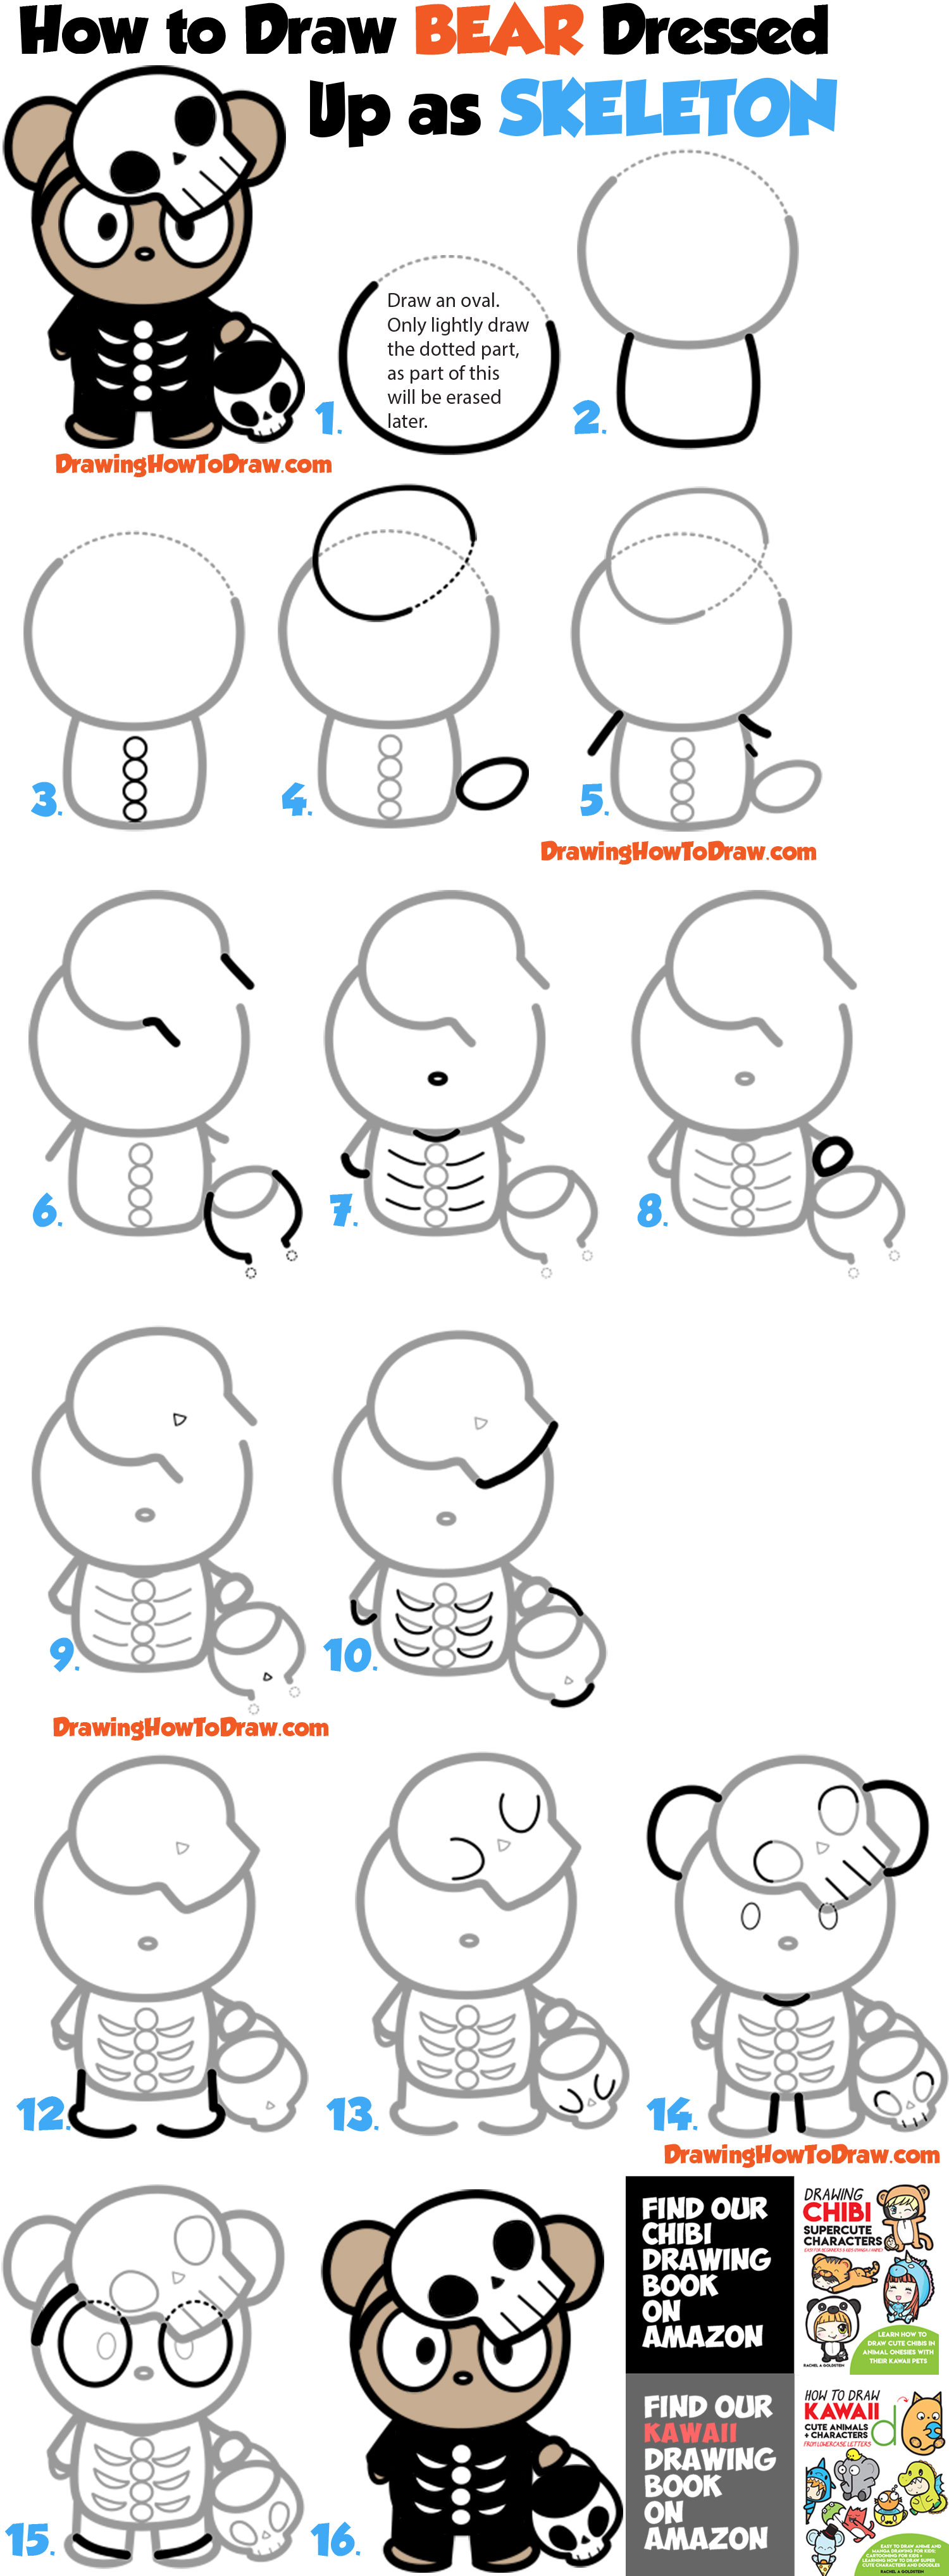 How to Draw a Cute Cartoon Bear Trick-or-Treater Dressed Up as a Skeleton for Halloween Easy Steps Drawing Lesson for Kids